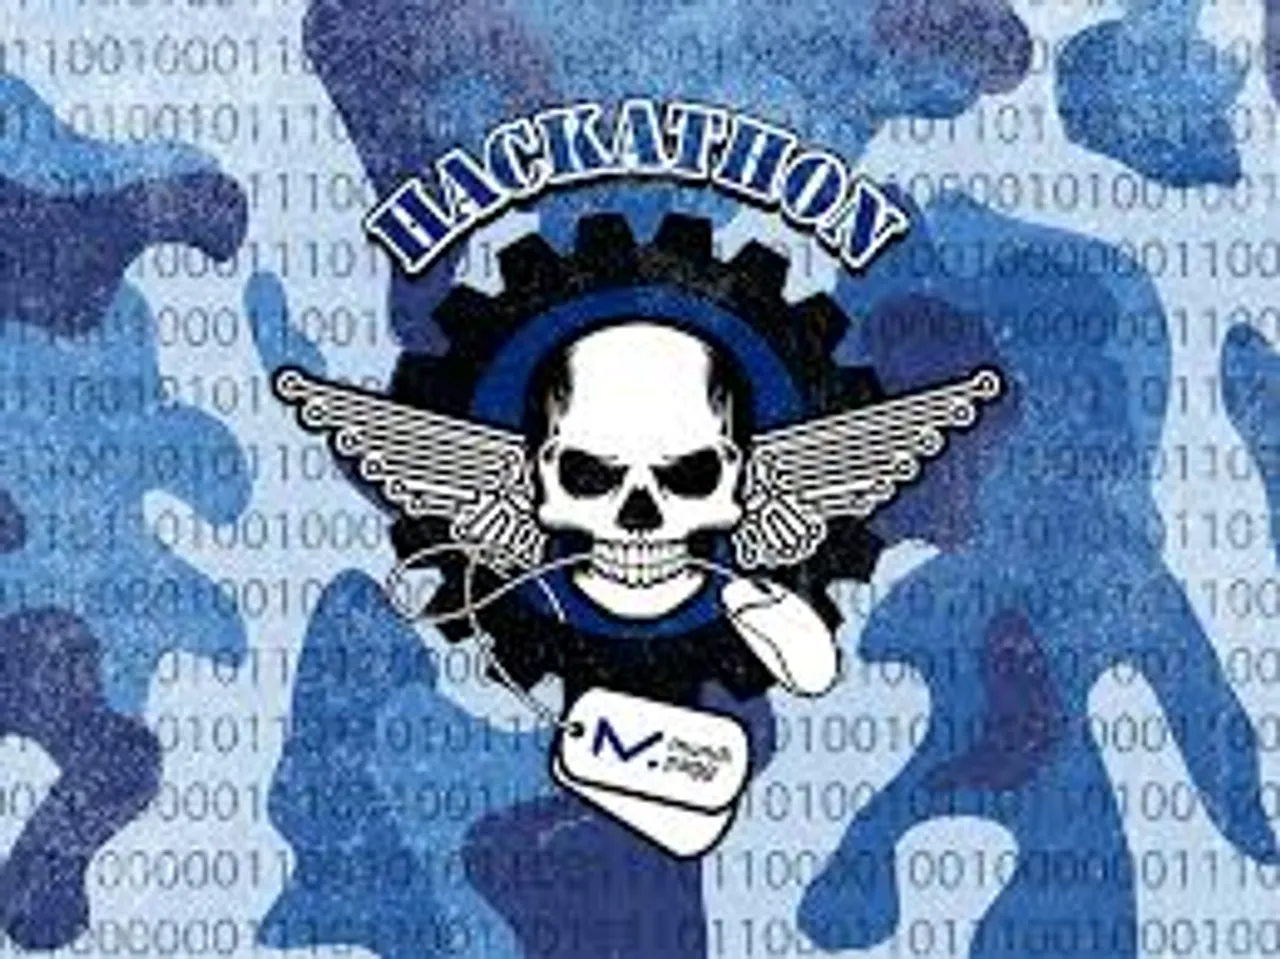 Hacktivist should be stopped, but are also desired for accountability: survey